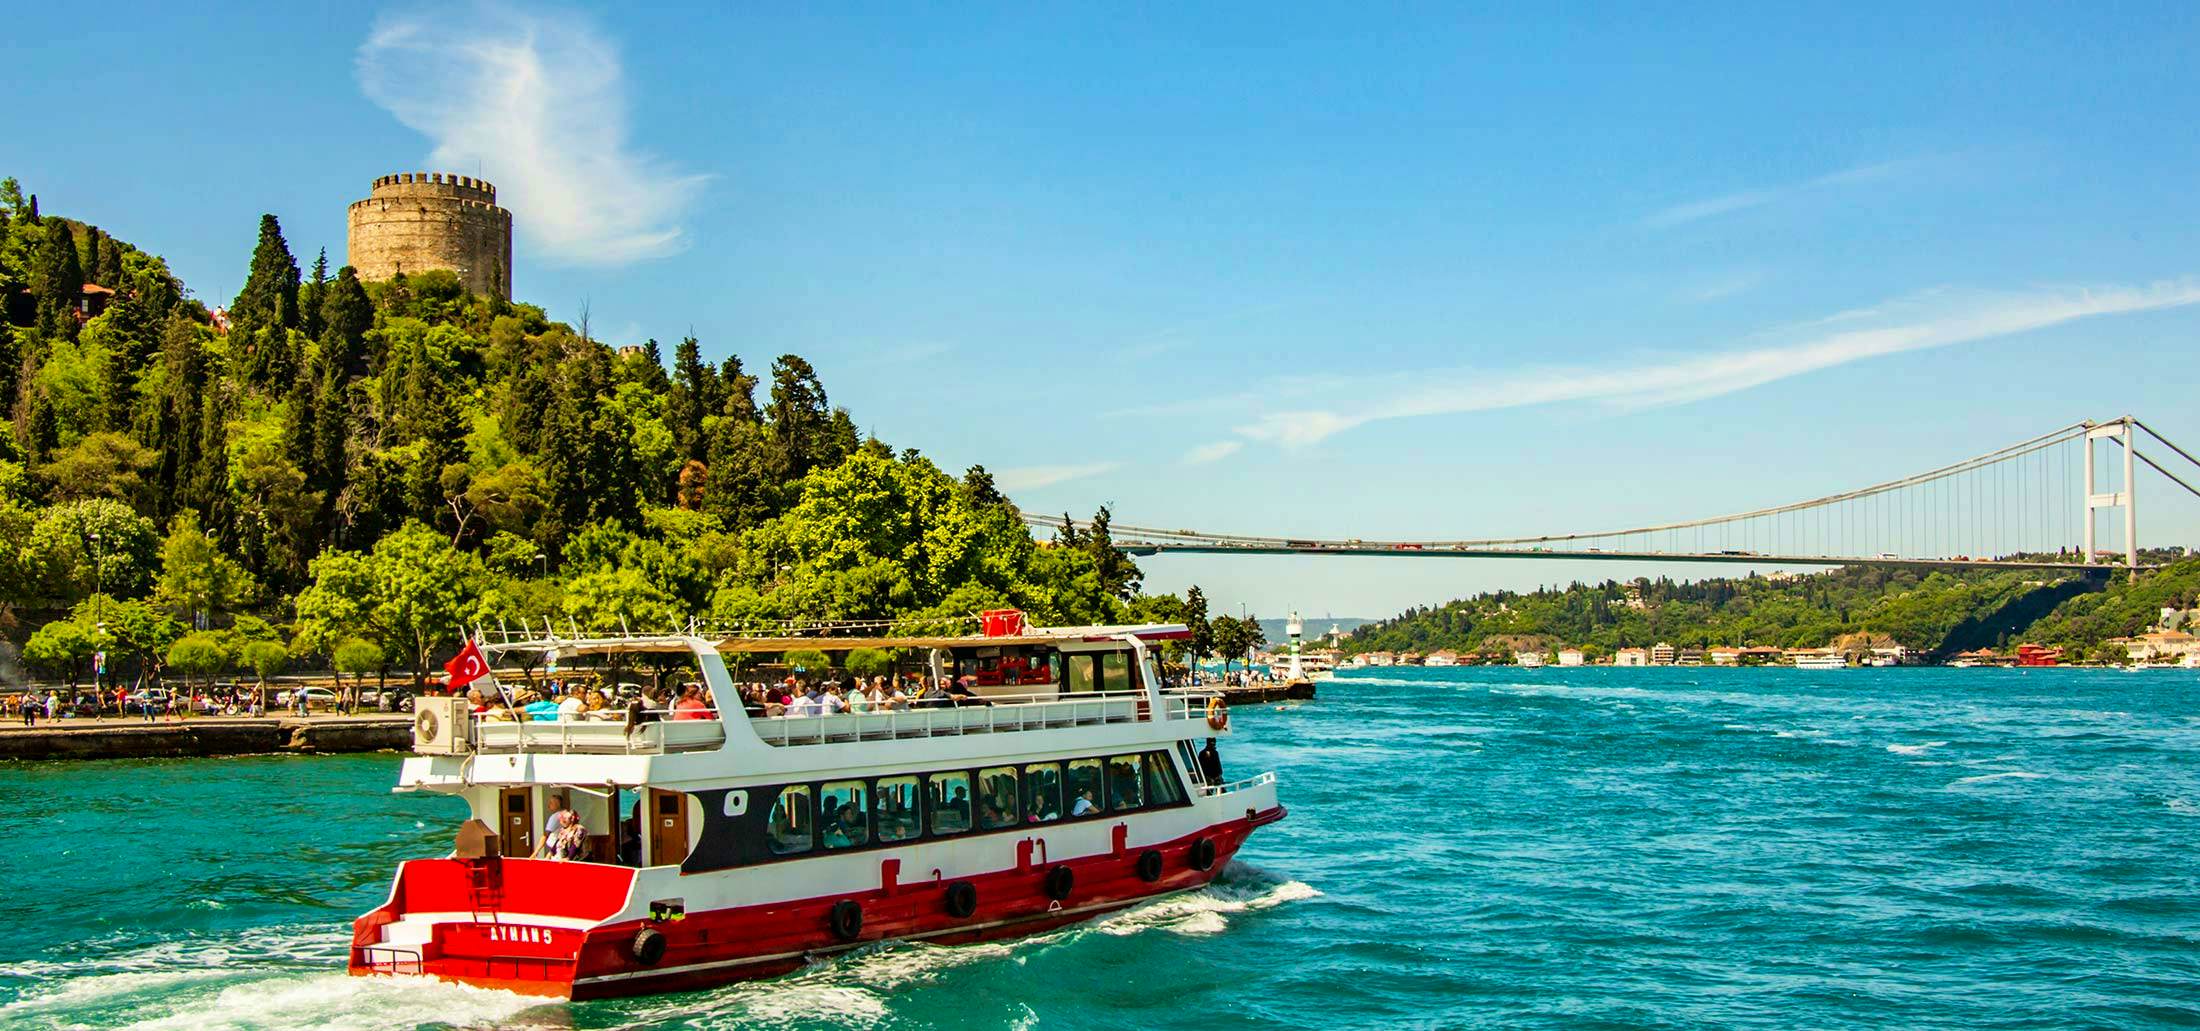 Full Day Bosphorus Cruise & Two Continents Tour (Dolmabahce Palace entrance is included) with Shared Transfers - Monday Closed